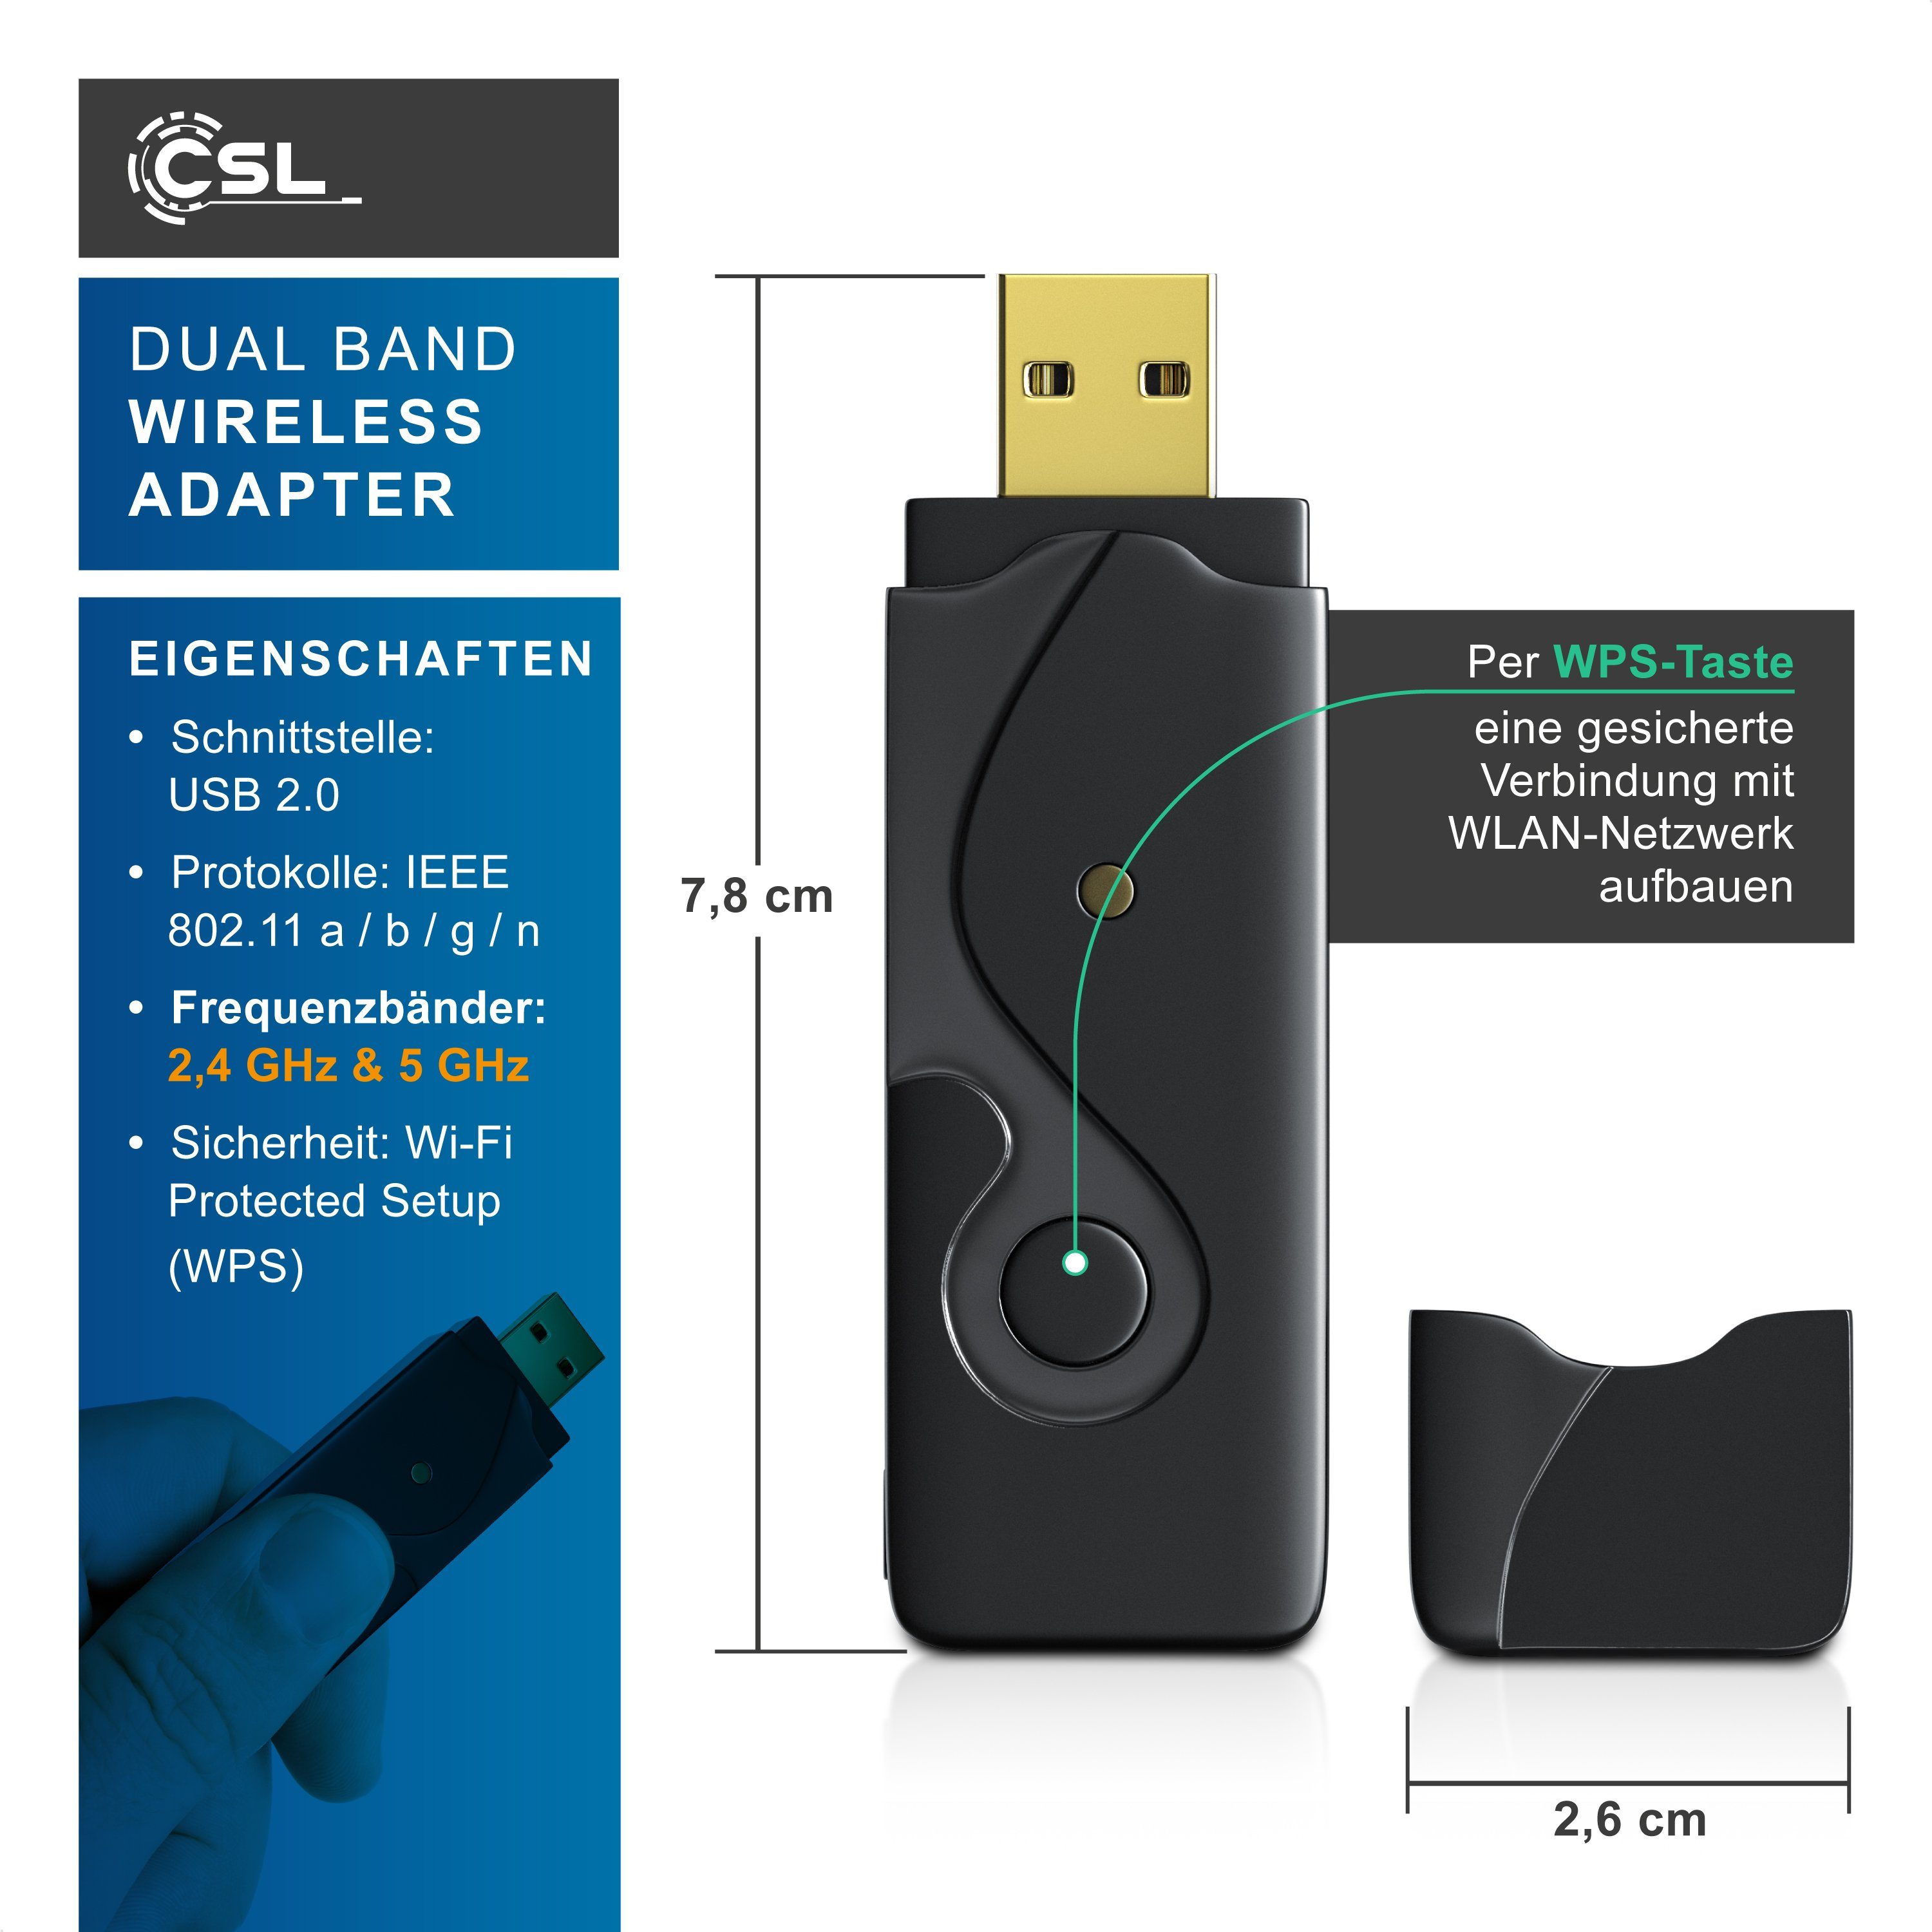 Aplic WLAN-Dongle, 600 MBit/s Dual 300 300 2,4GHz Mbps Adapter, WiFi Mbps 5GHz Stick Band